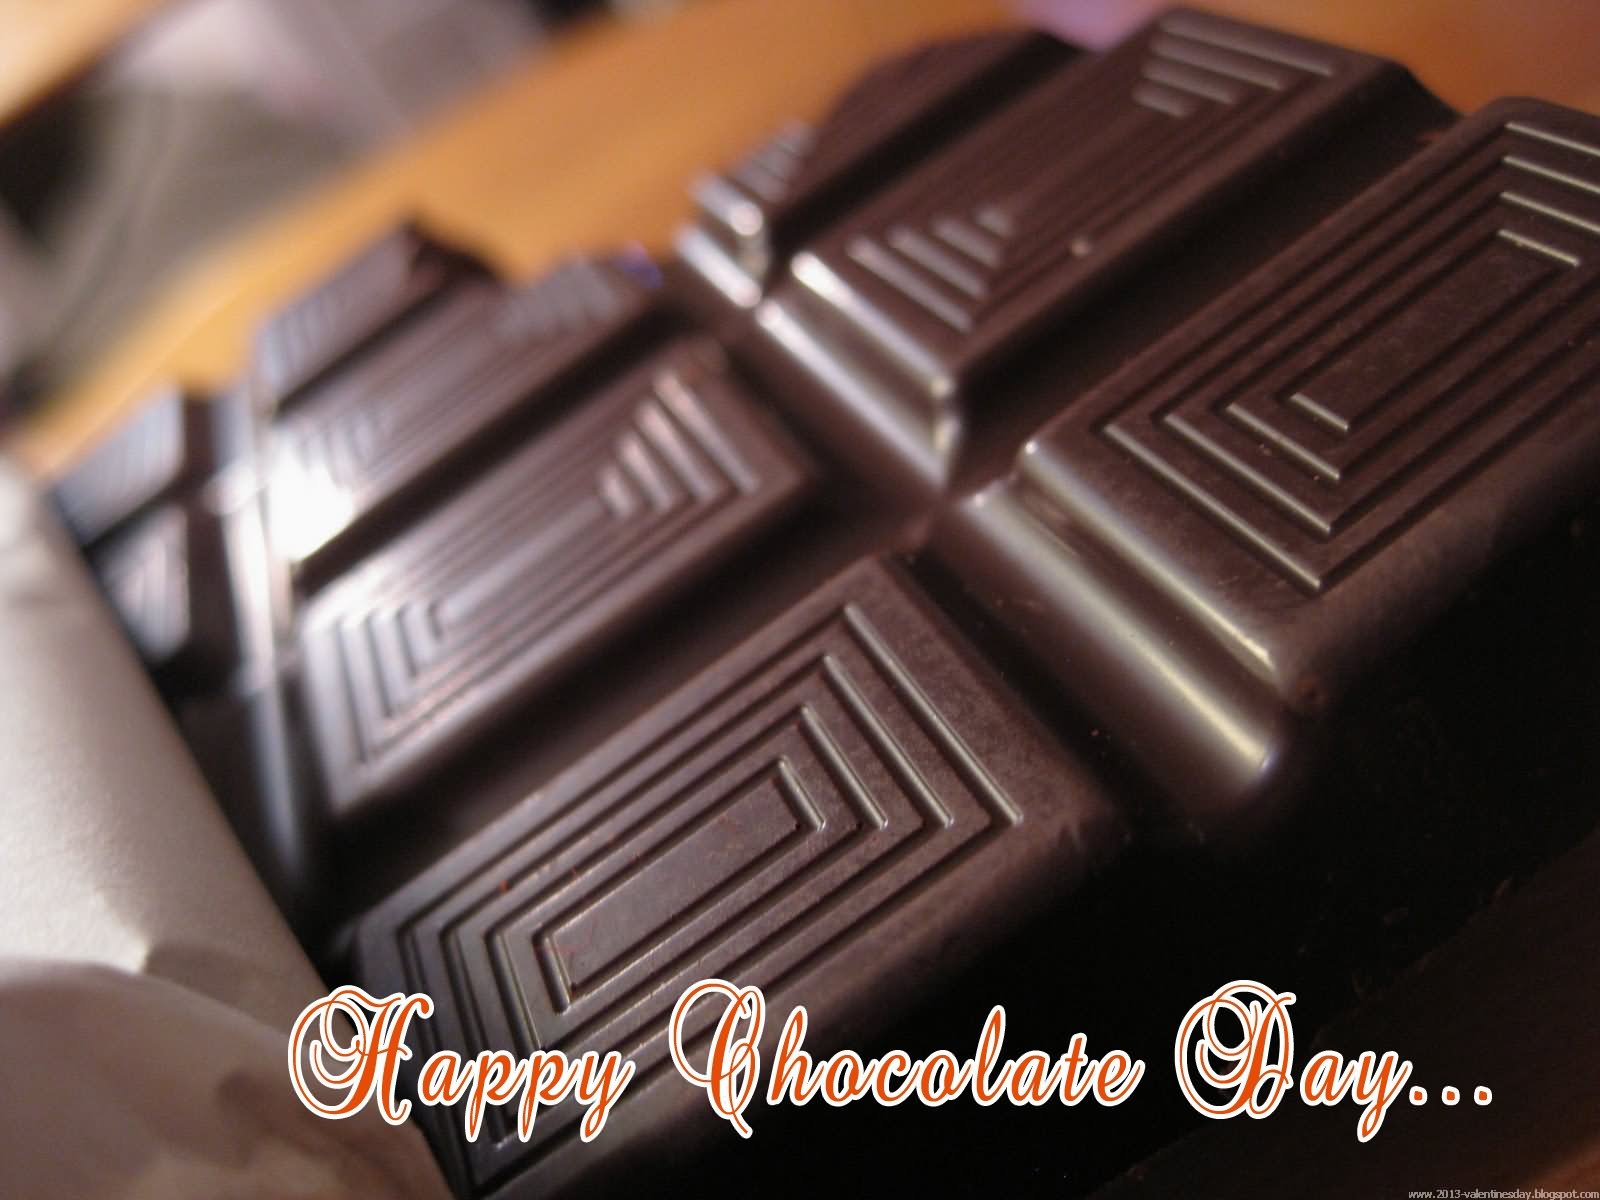 Happy Chocolate Day Greetings Picture